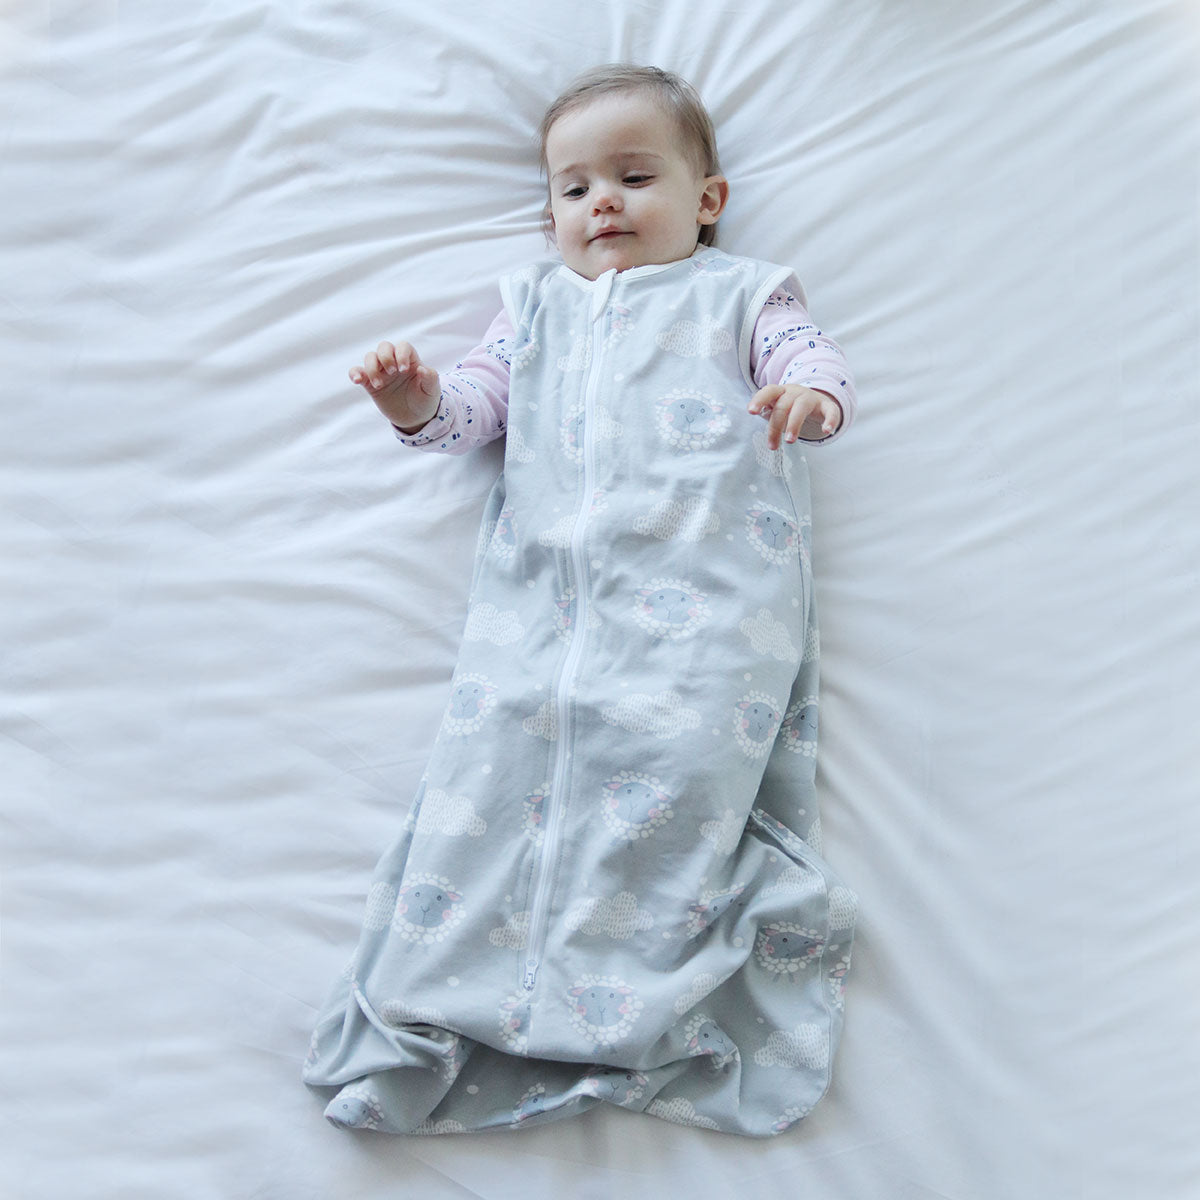 Snuggletime Quilted Cotton Sleep Sack